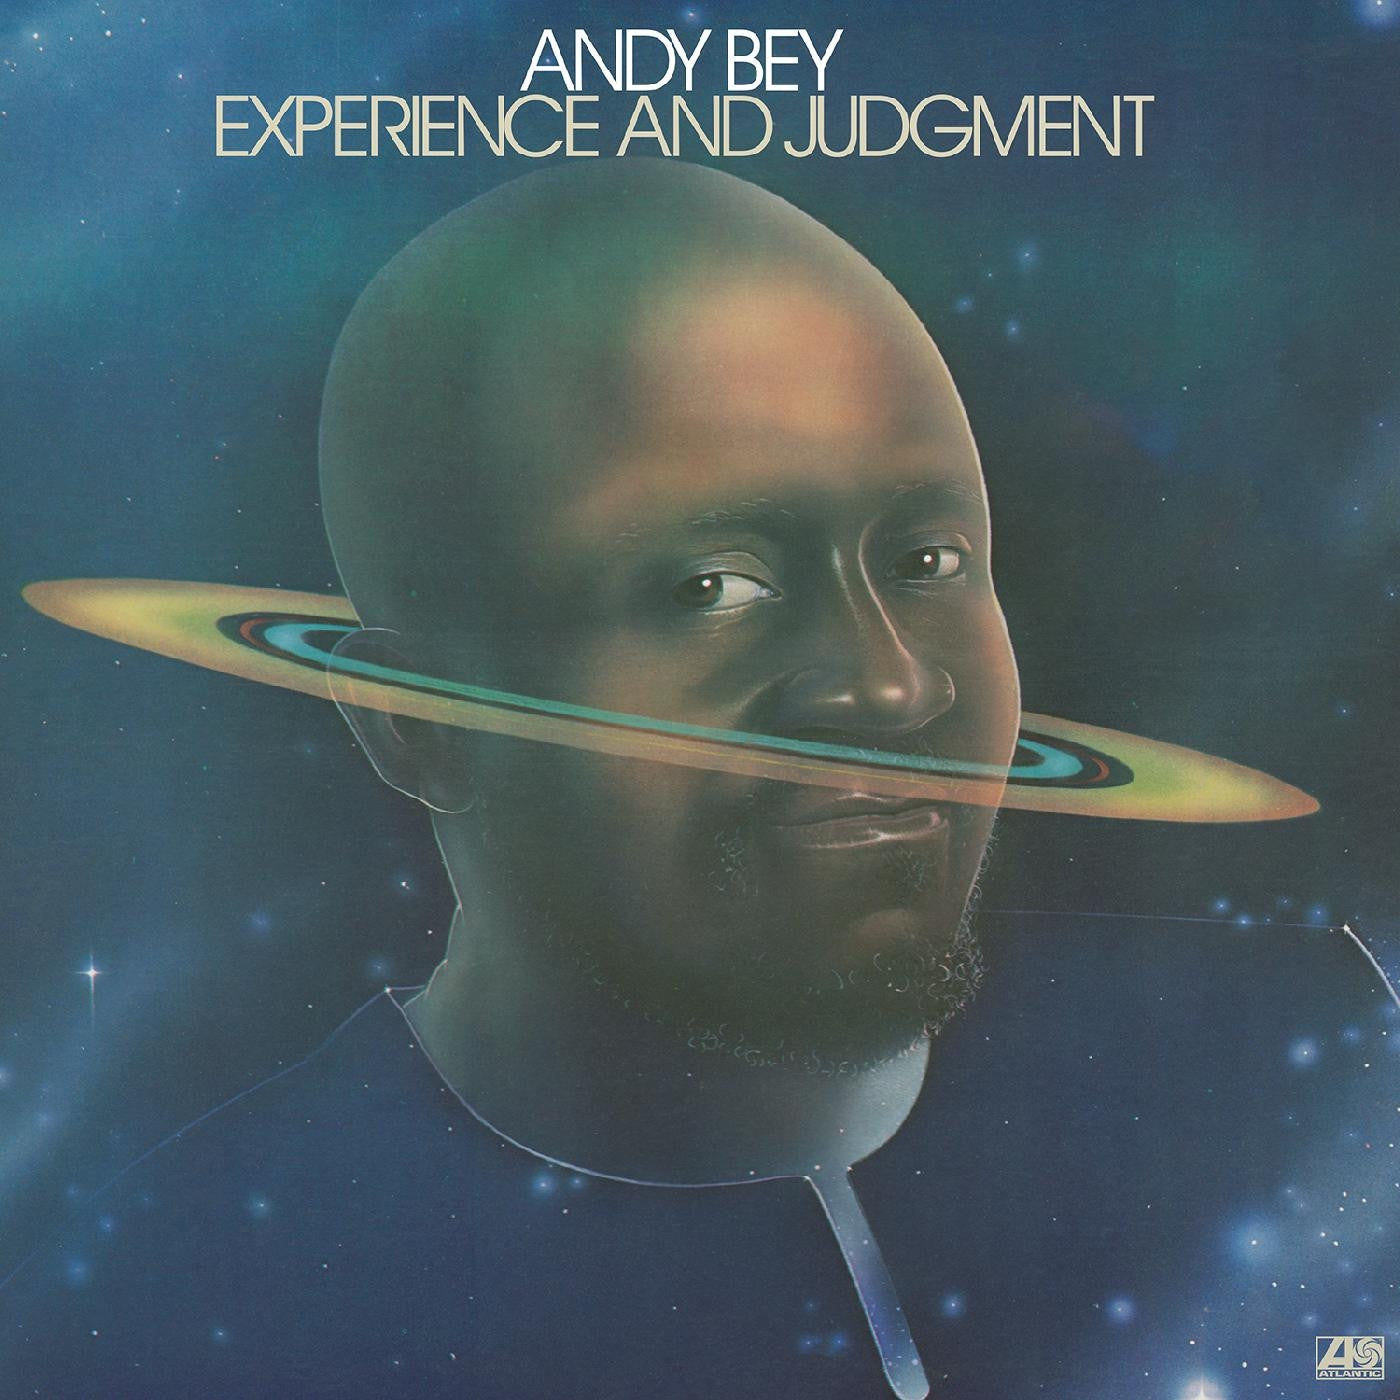 Andy Bey – Experience And Judgment (1974) - New LP Record 2022 Atlantic / Real Gone Music Sea Blue Vinyl - Jazz / Soul-Jazz / Vocal